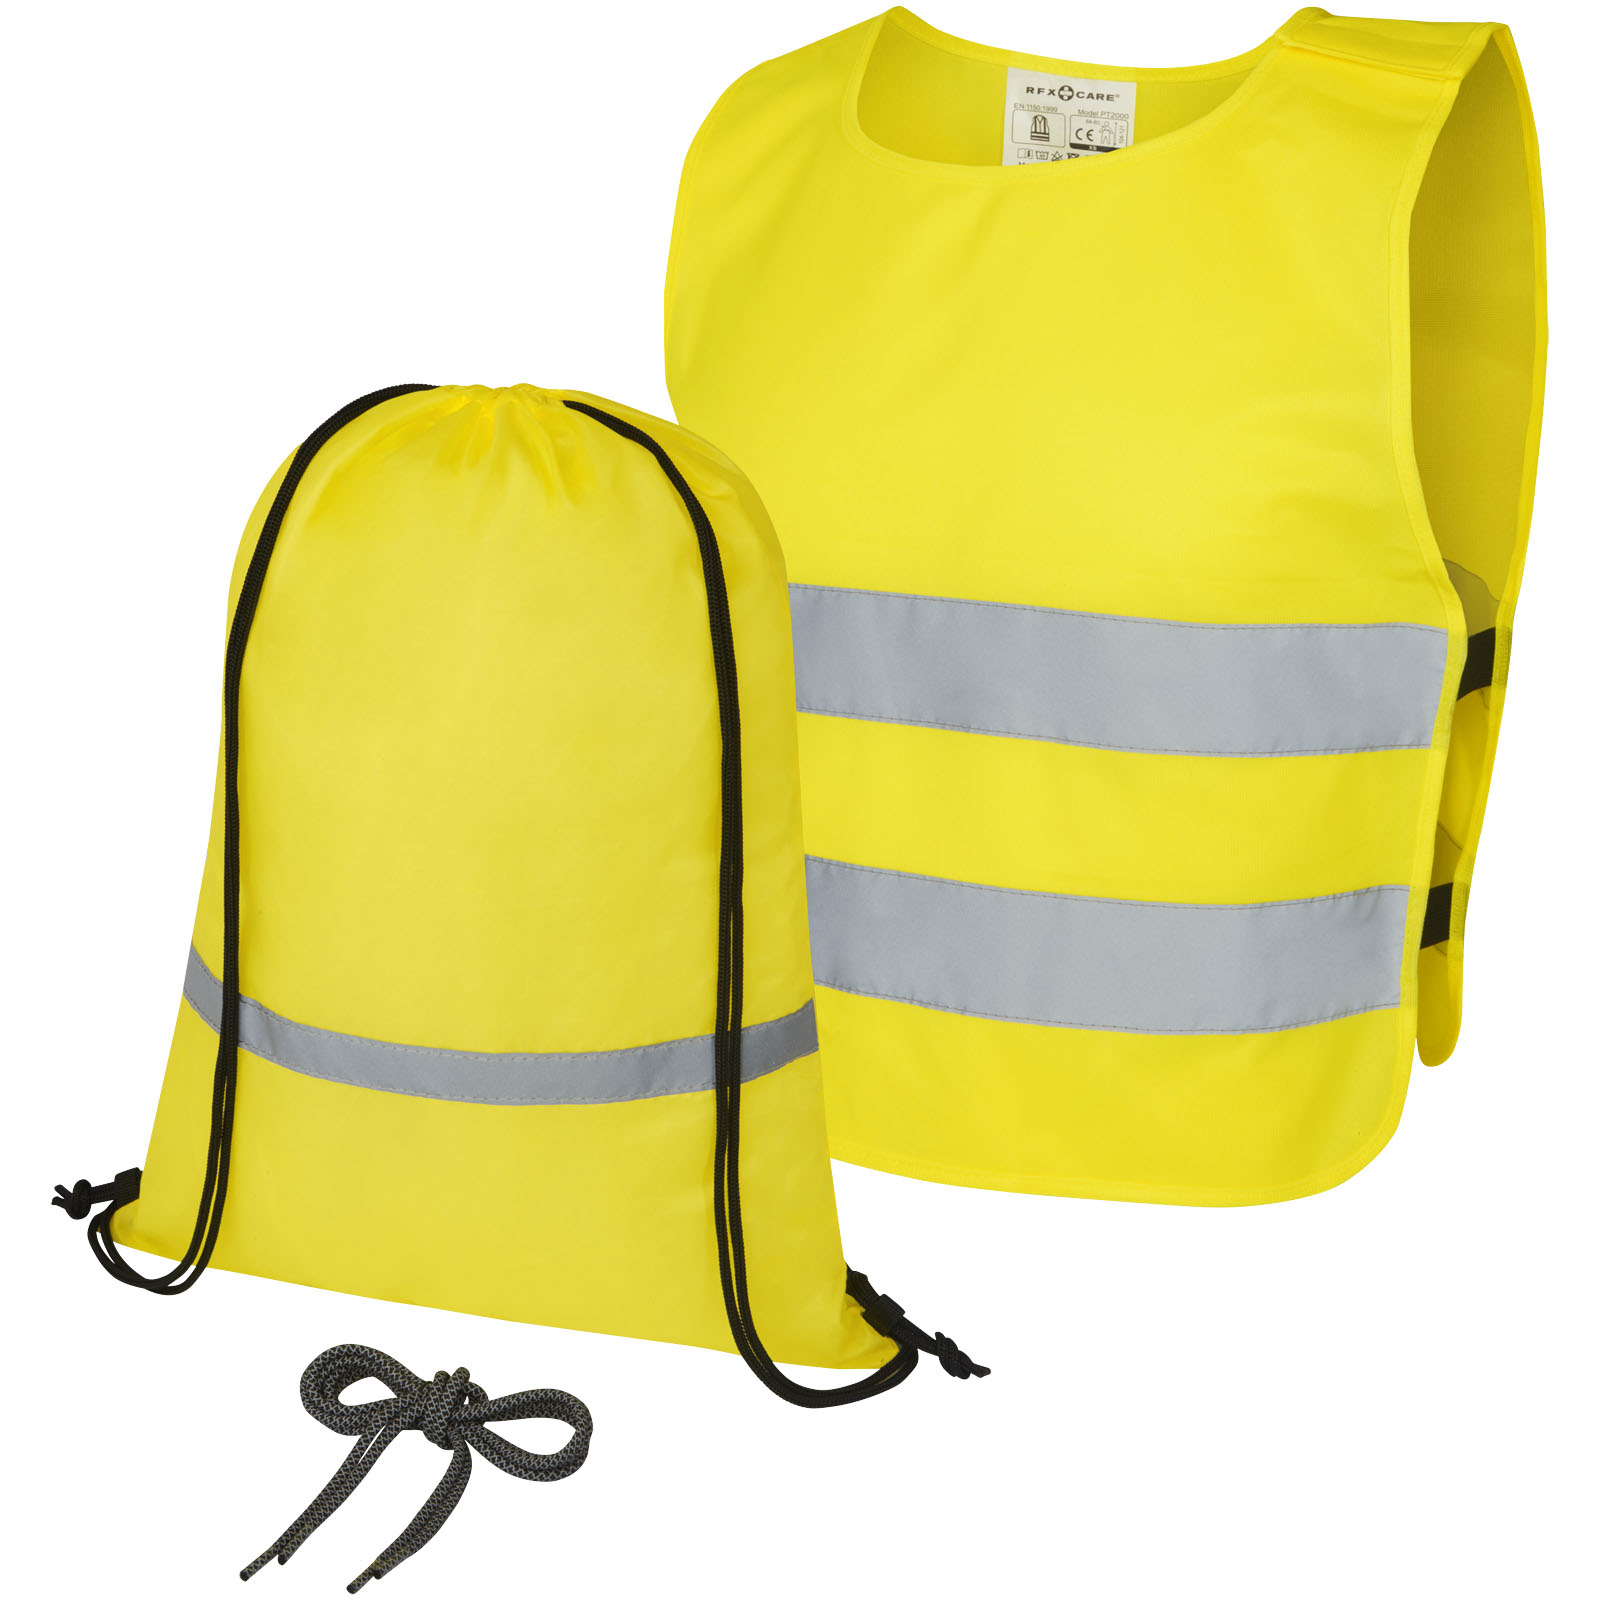 Tools & Car Accessories - RFX™ Ingeborg safety and visibility set for childeren 7-12 years